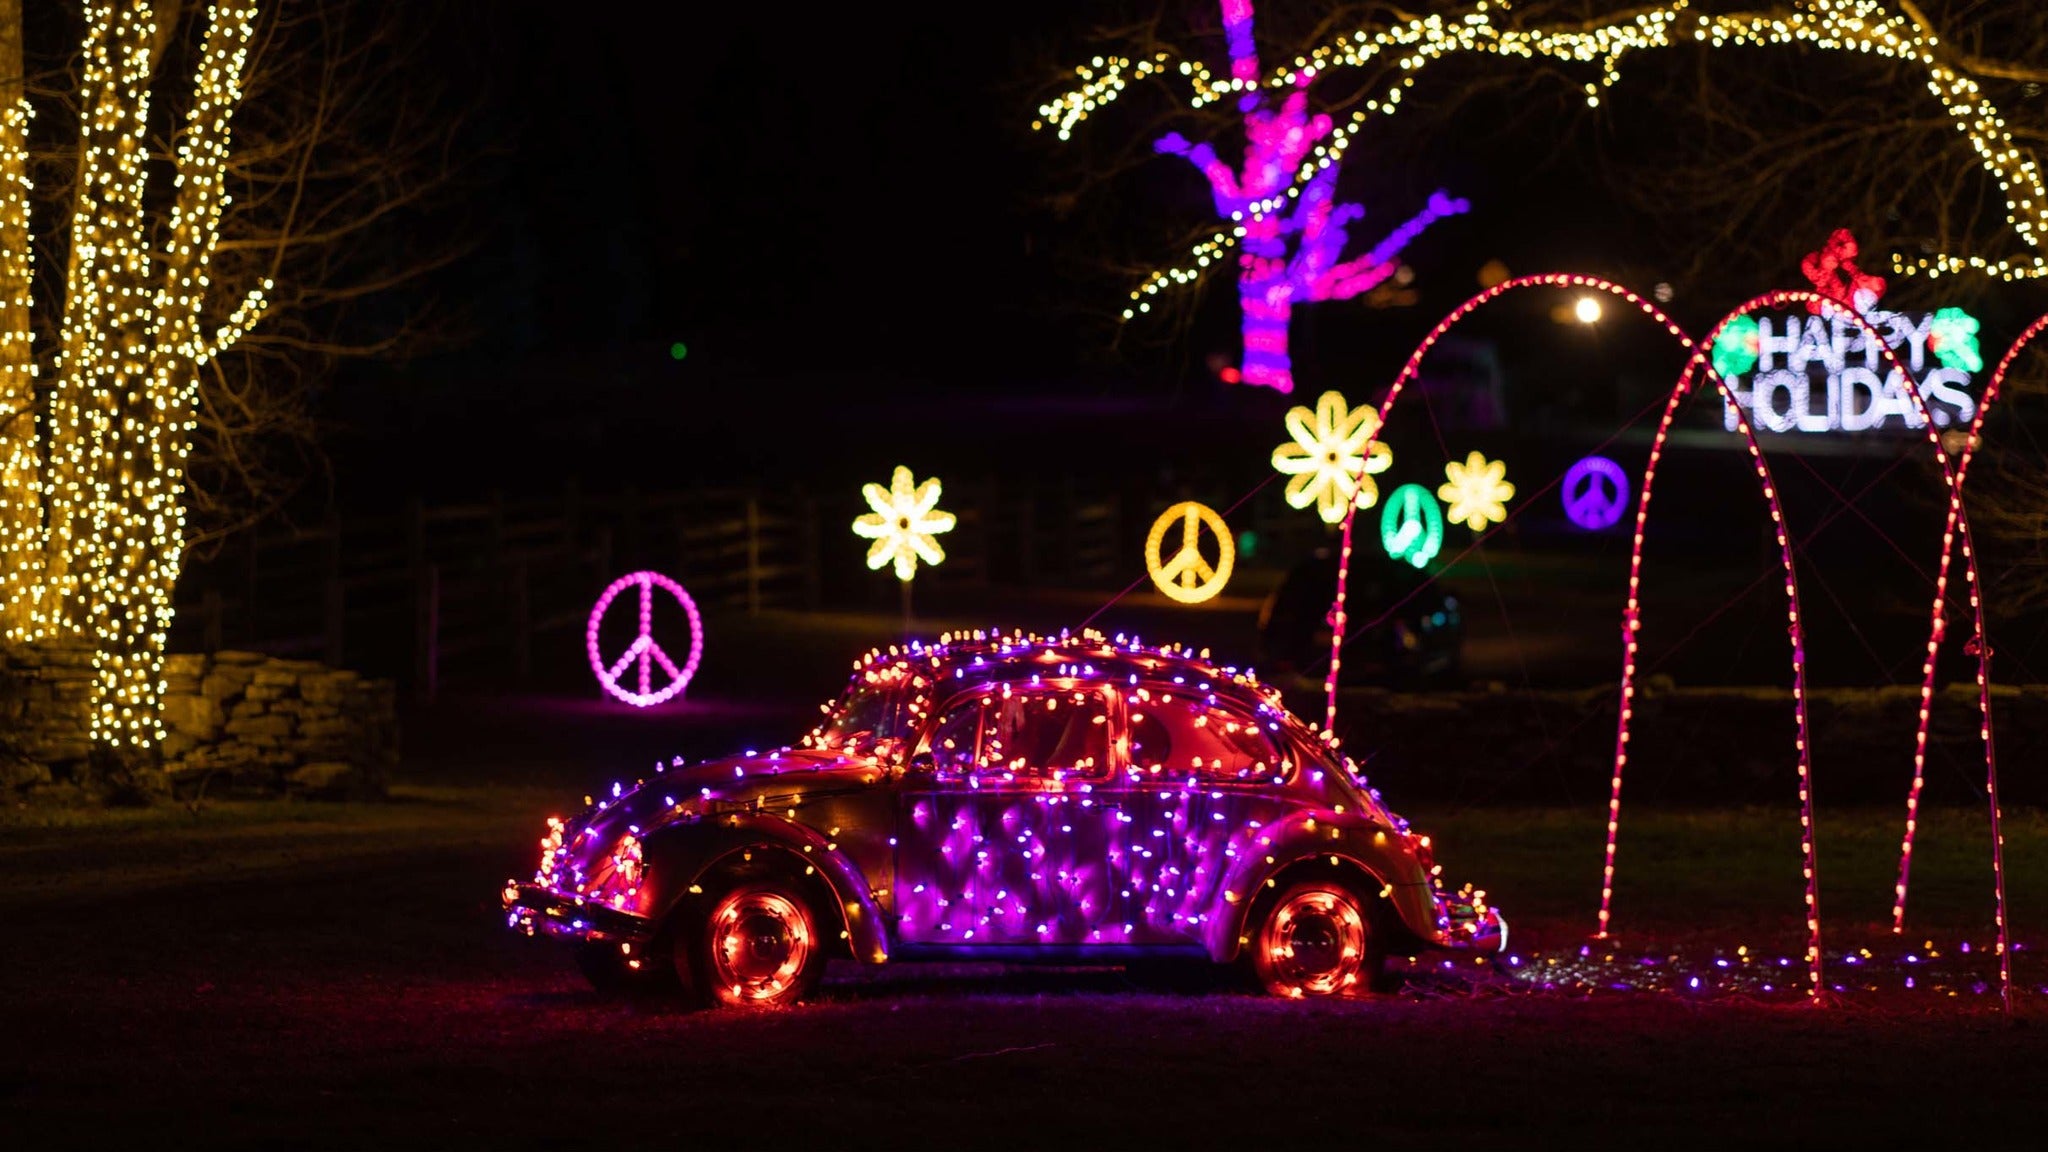 Peace, Love & Lights powered by Healey Brothers in Bethel promo photo for Advanced Pricing presale offer code